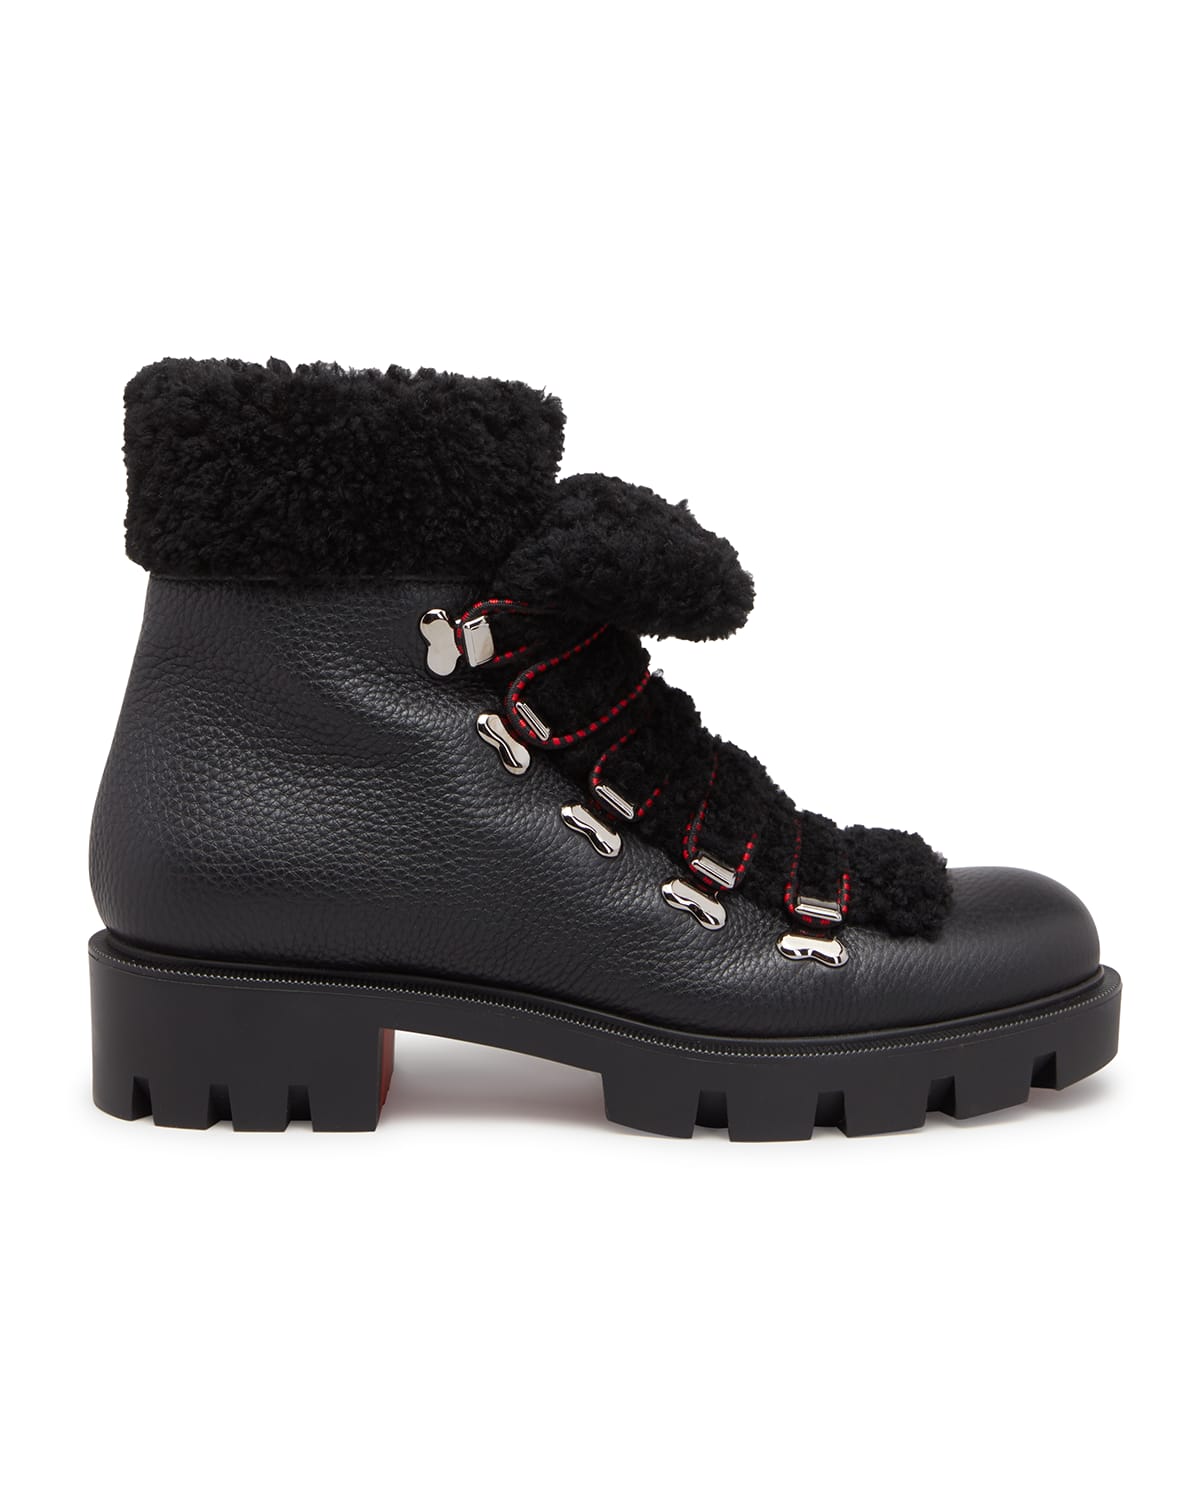 Christian Louboutin Edelvizir Leather Shearling Red Sole Ranger Booties